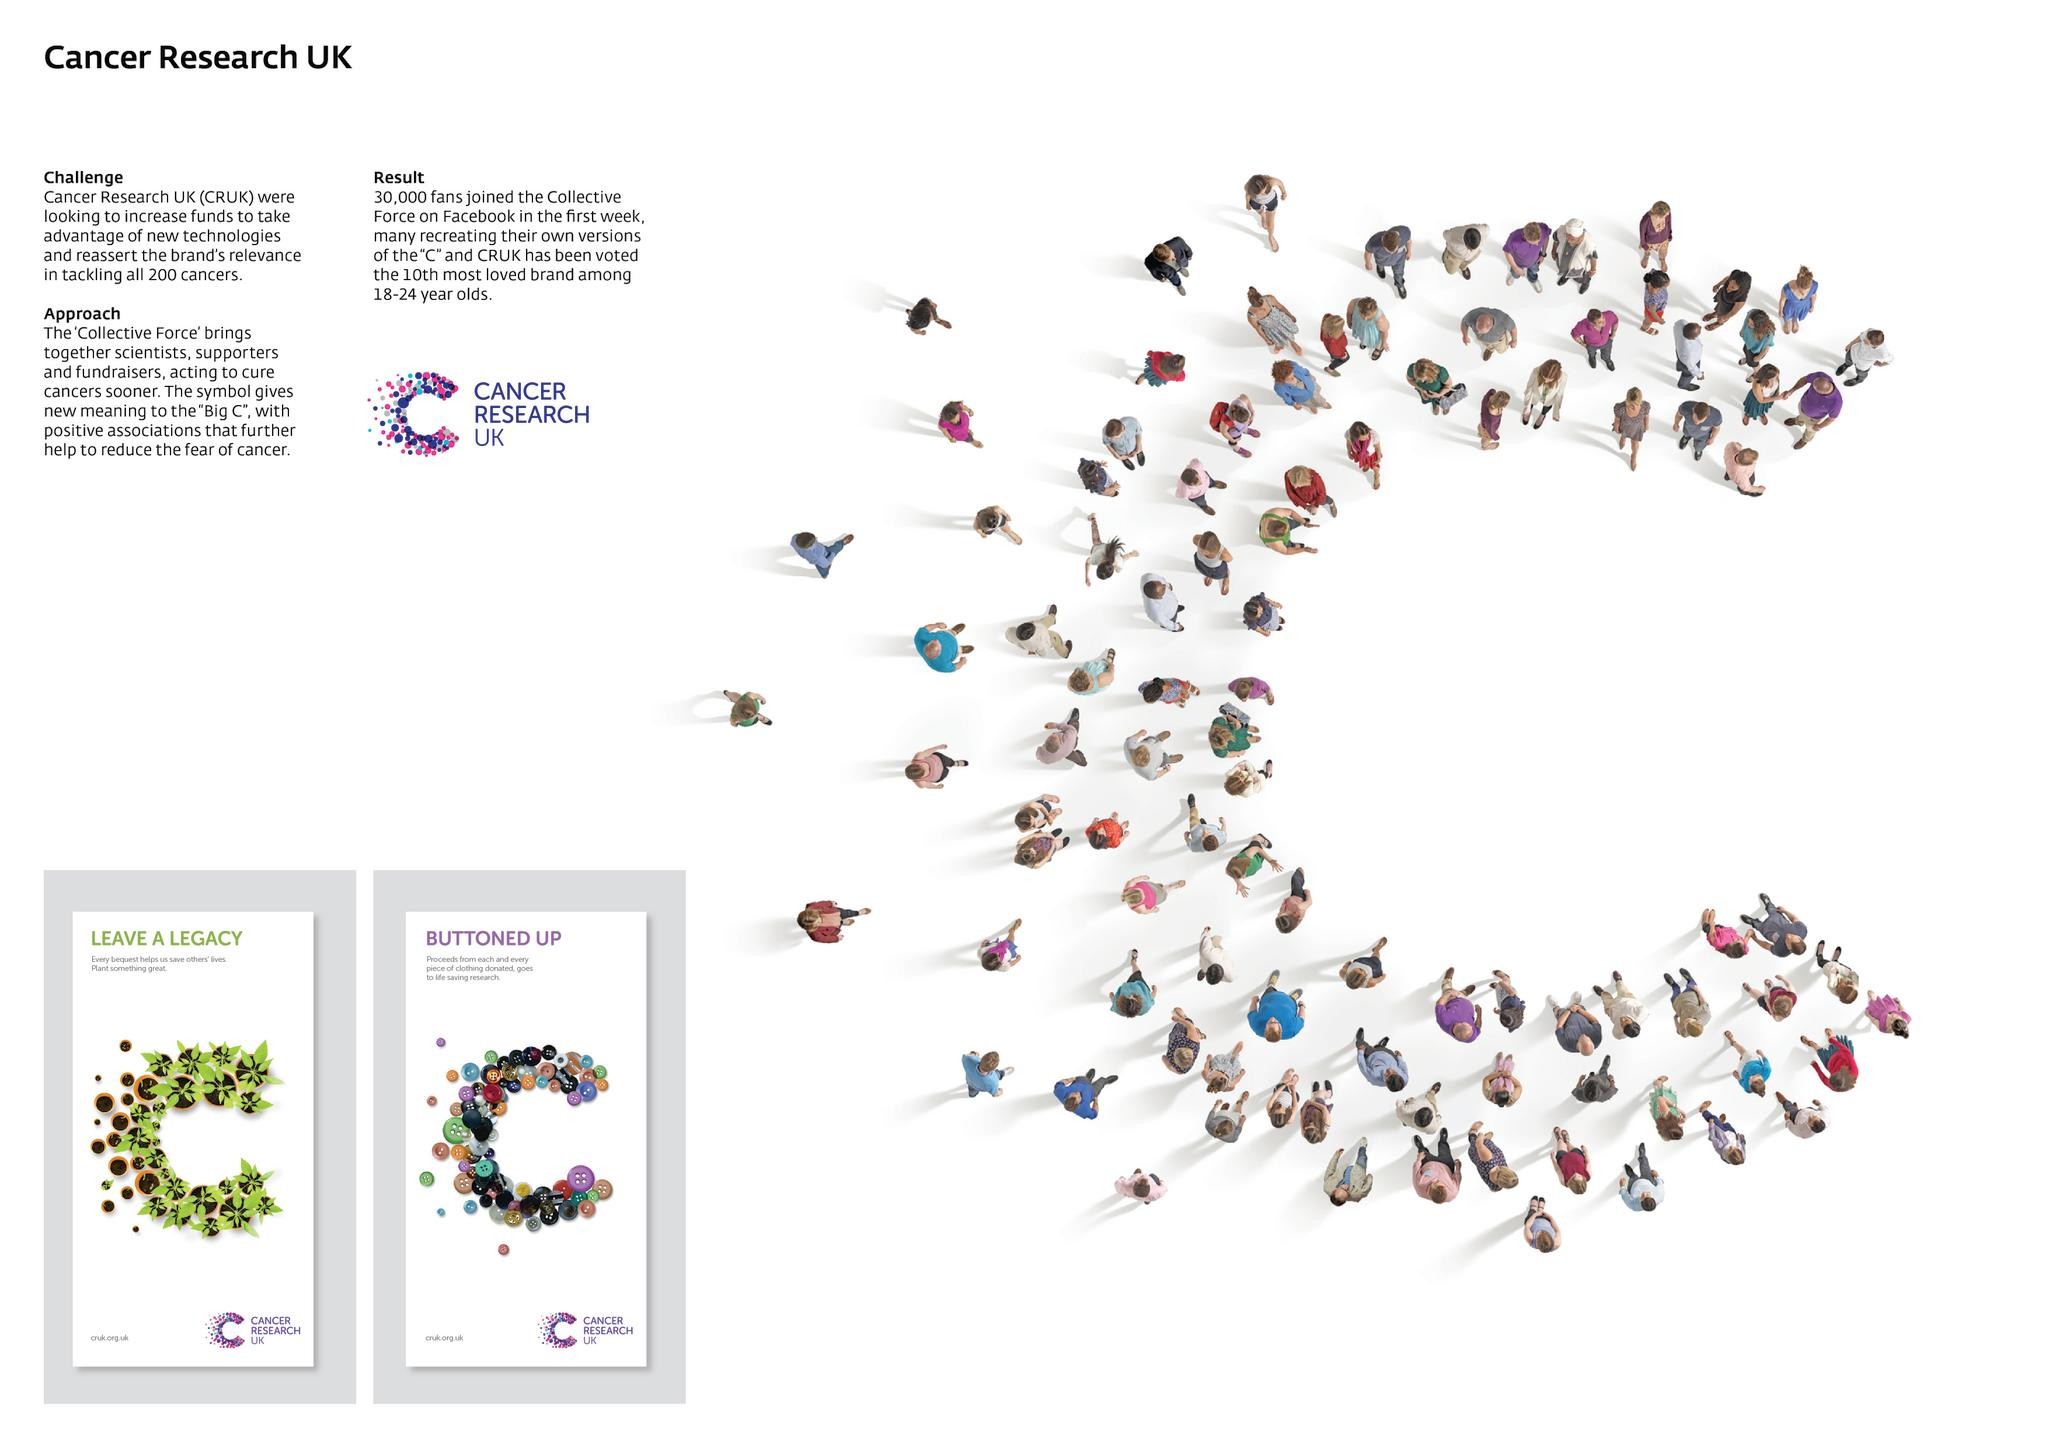 CANCER RESEARCH UK BRAND IDENTITY